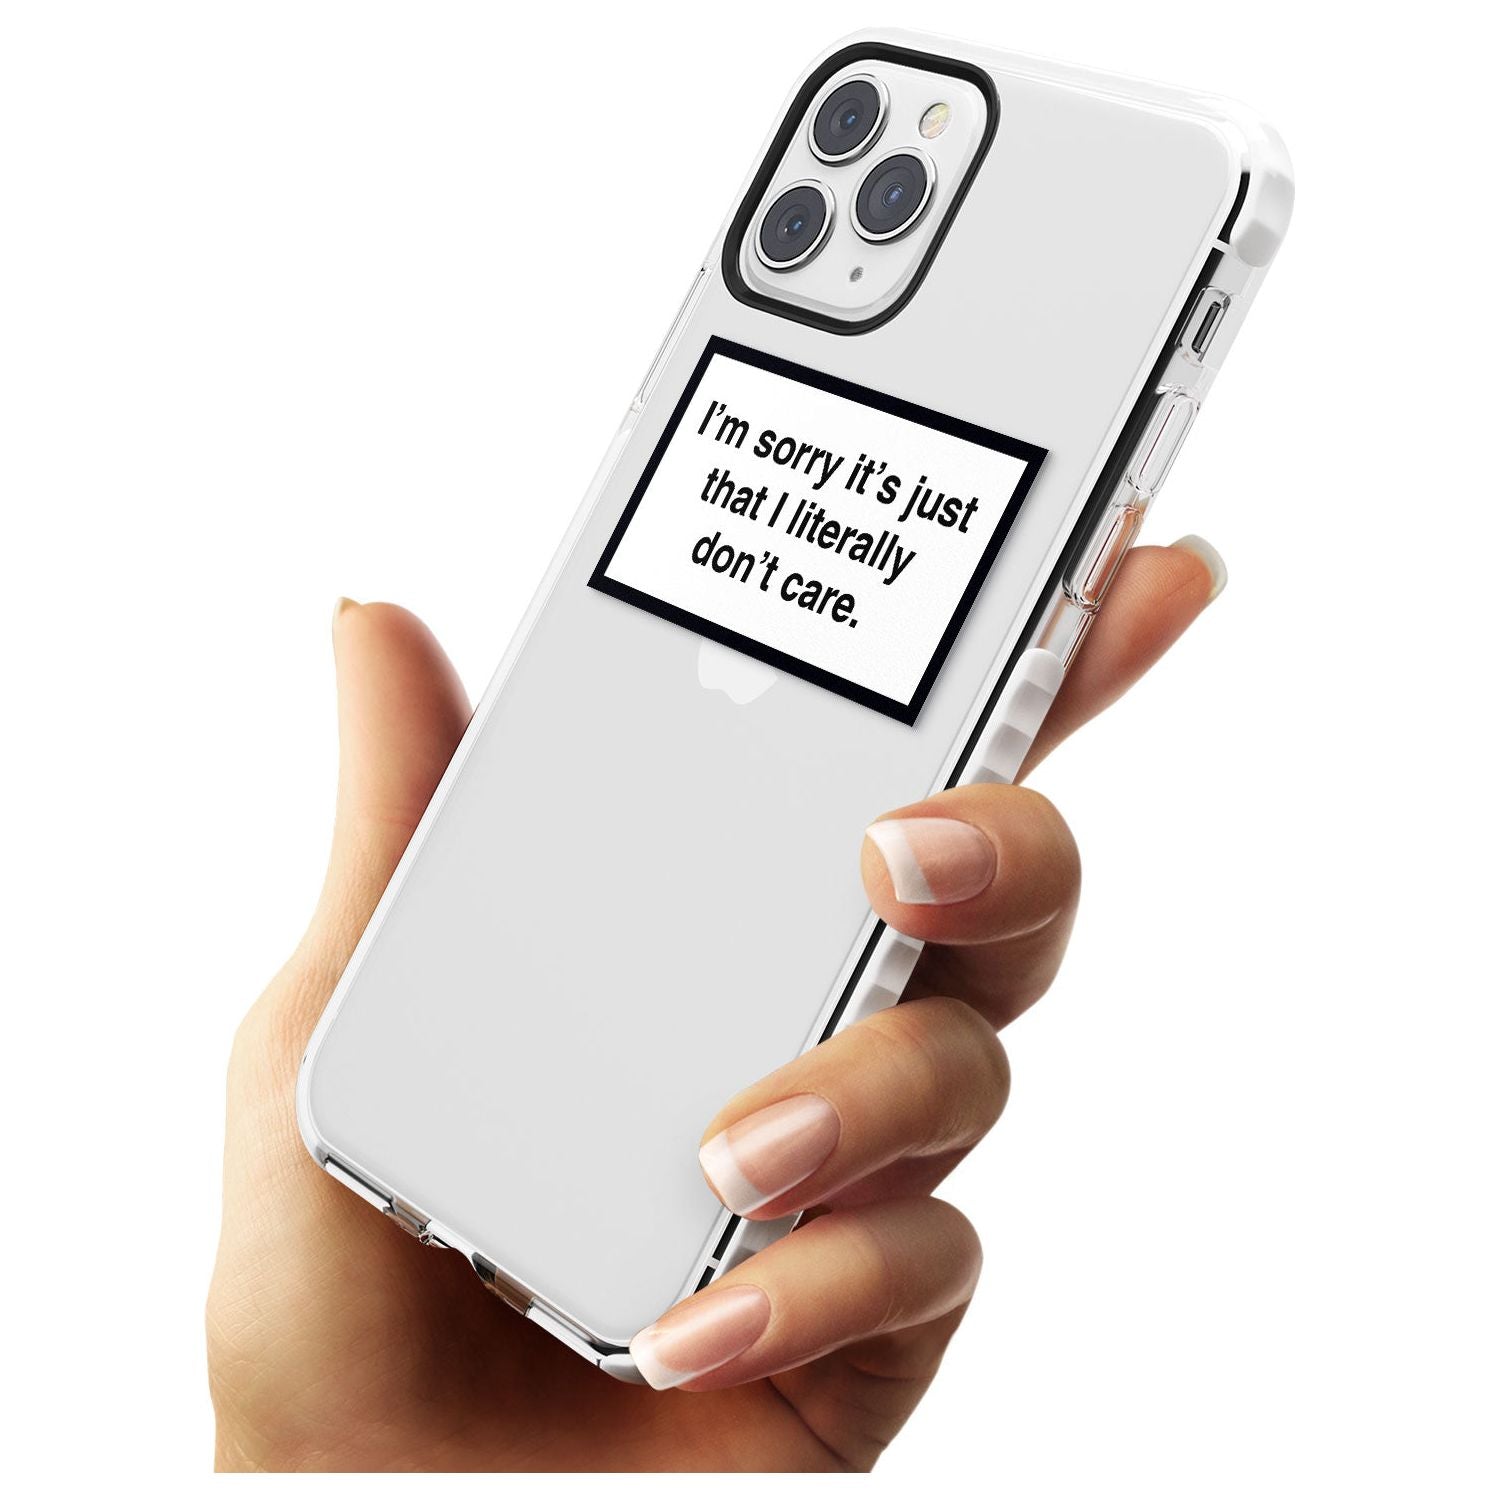 I'm sorry it's just that I literally don't care Slim TPU Phone Case for iPhone 11 Pro Max